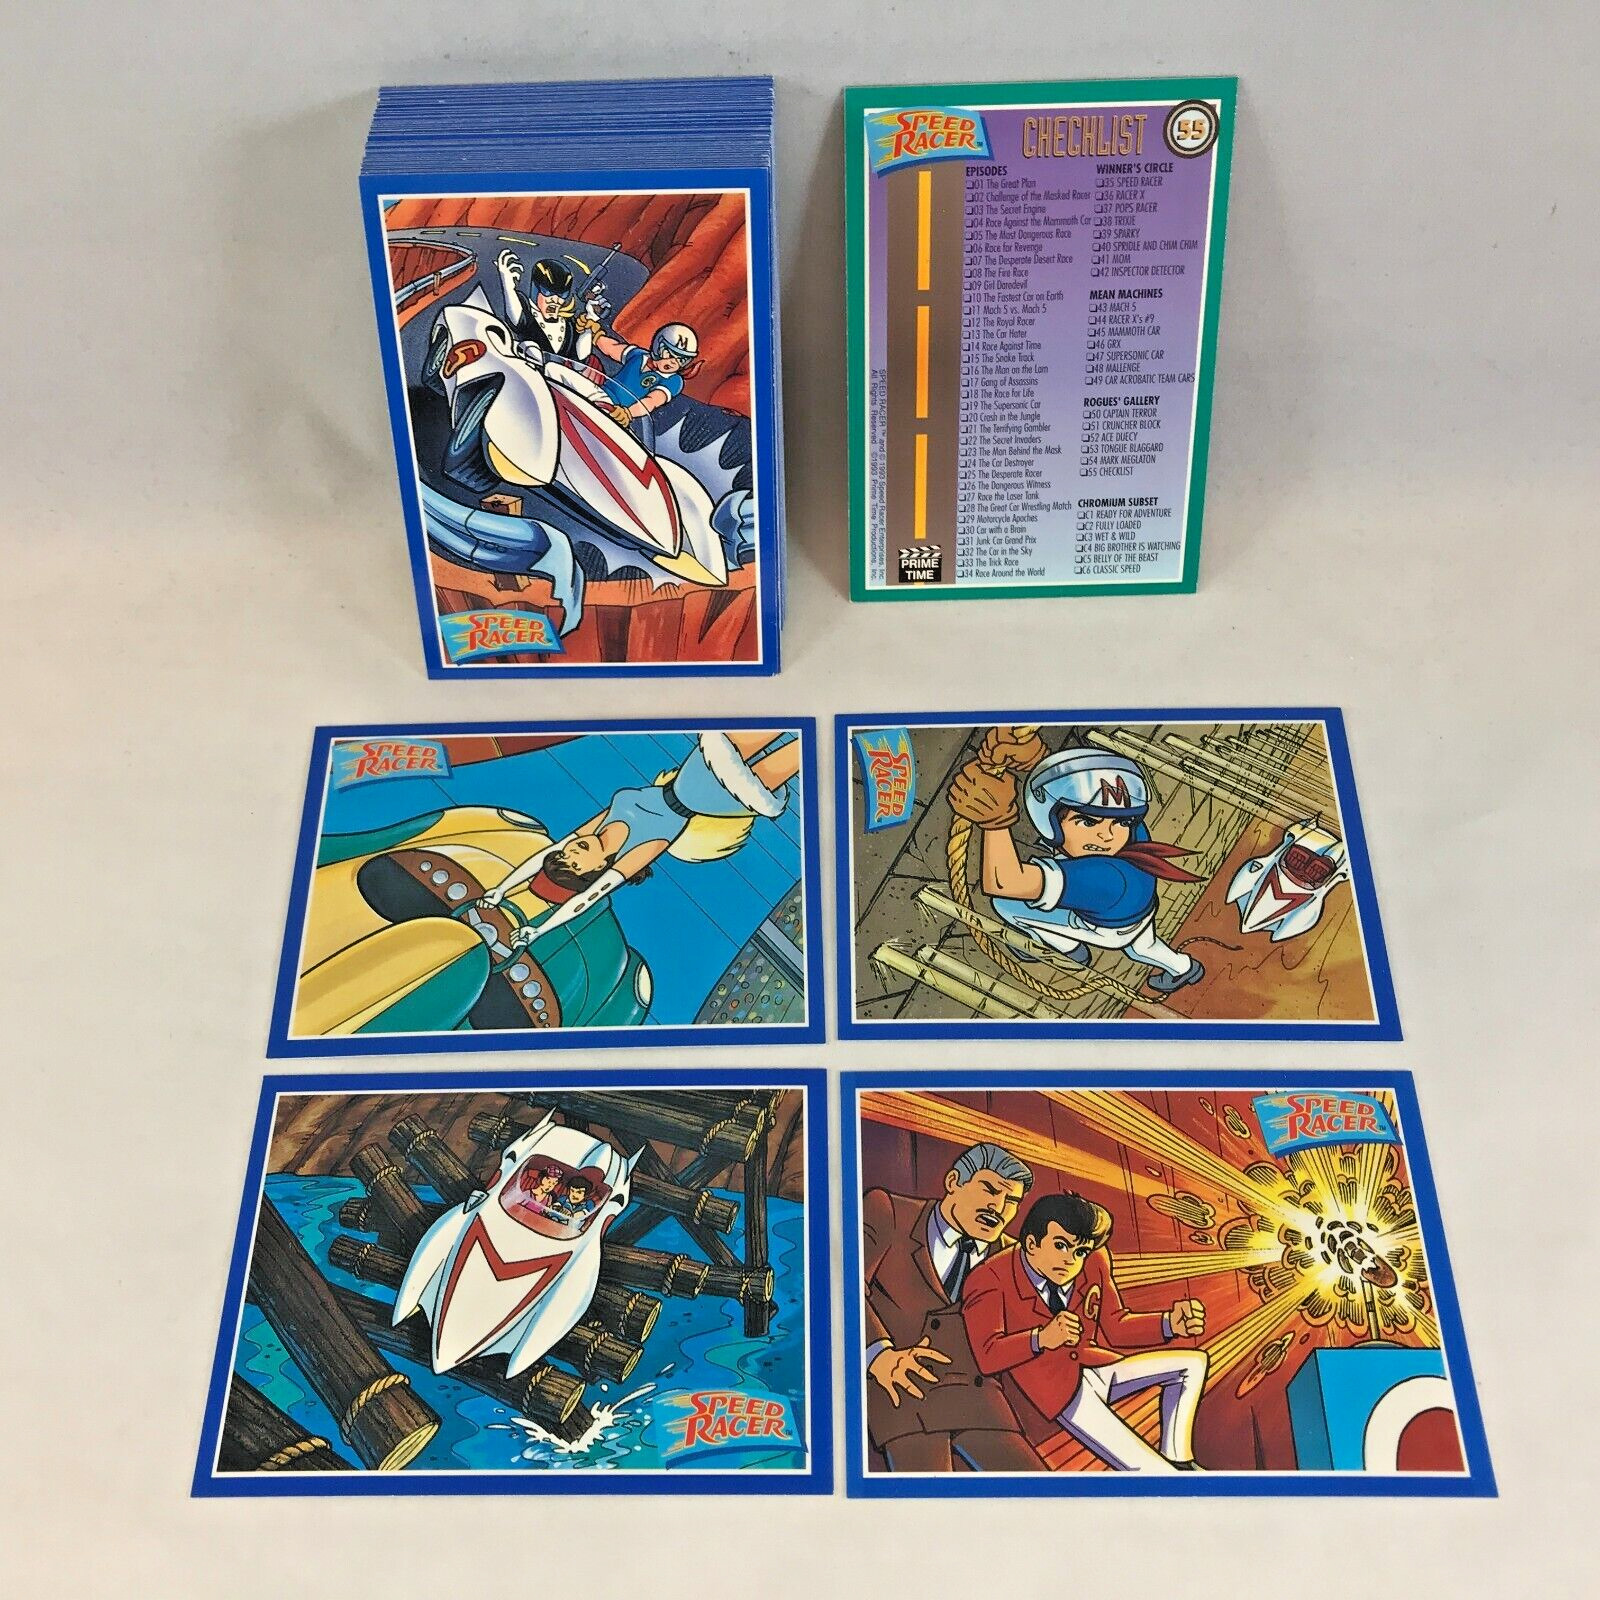 SPEED RACER (Prime Time/1993) Complete Trading Card Set CLASSIC ANIMATED IMAGES